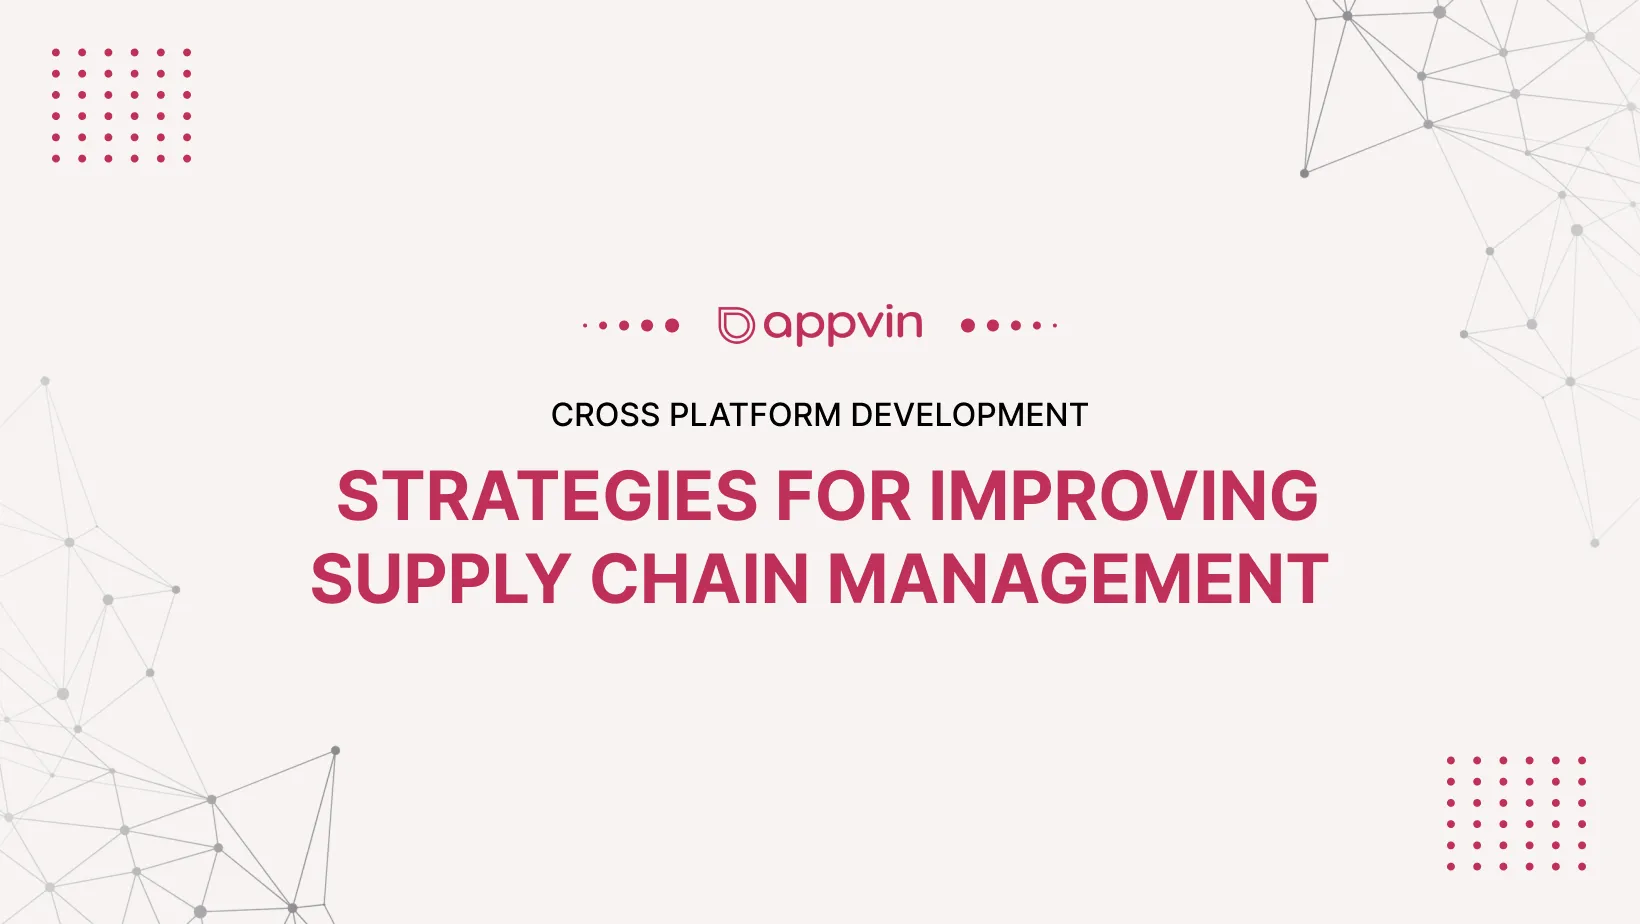 Strategies for improving supply chain management